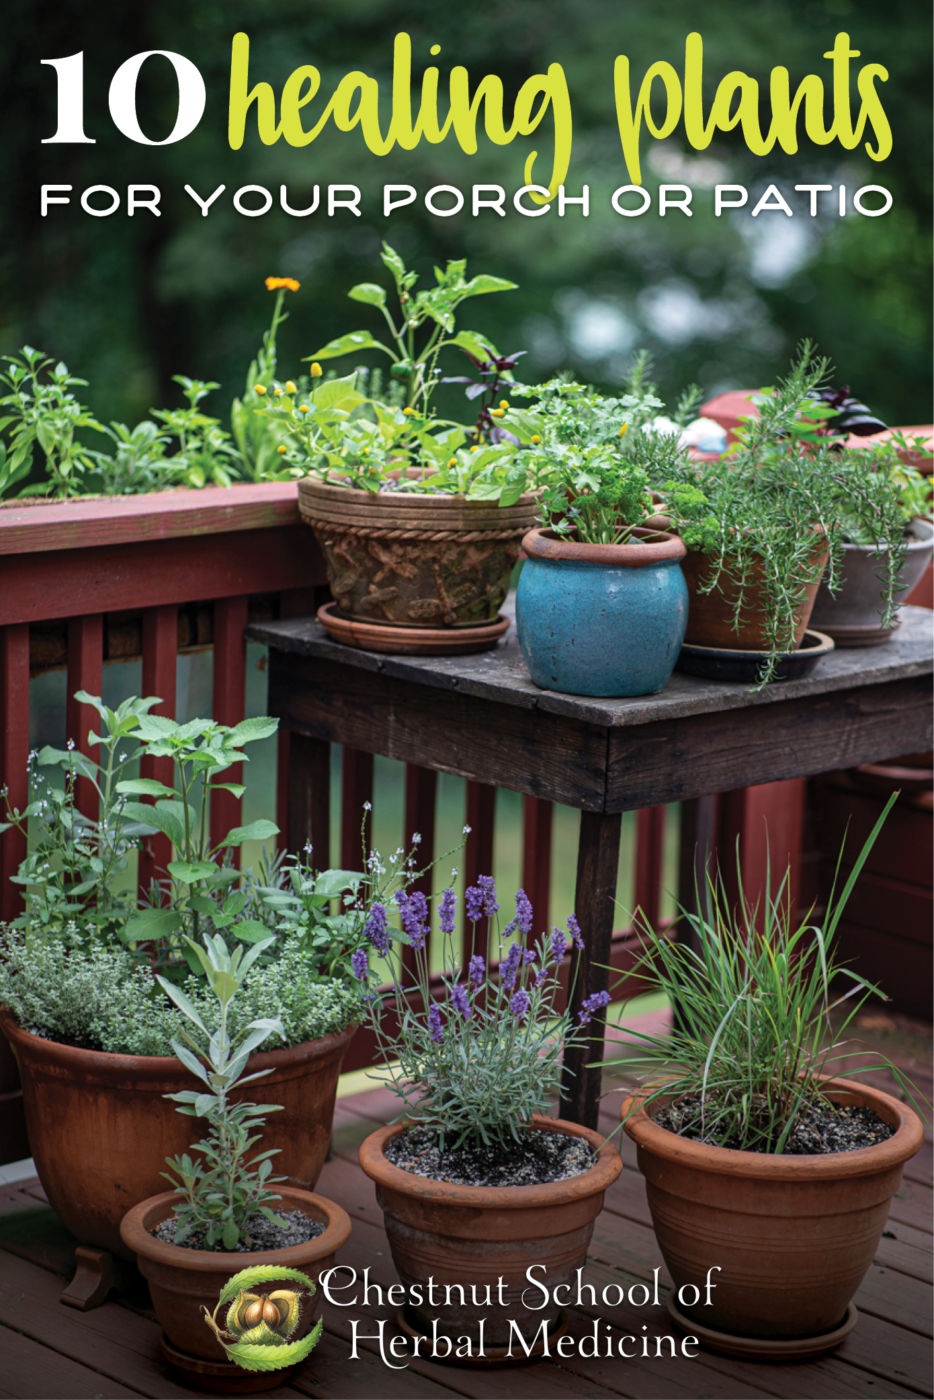 10 healing plants for your porch or patio